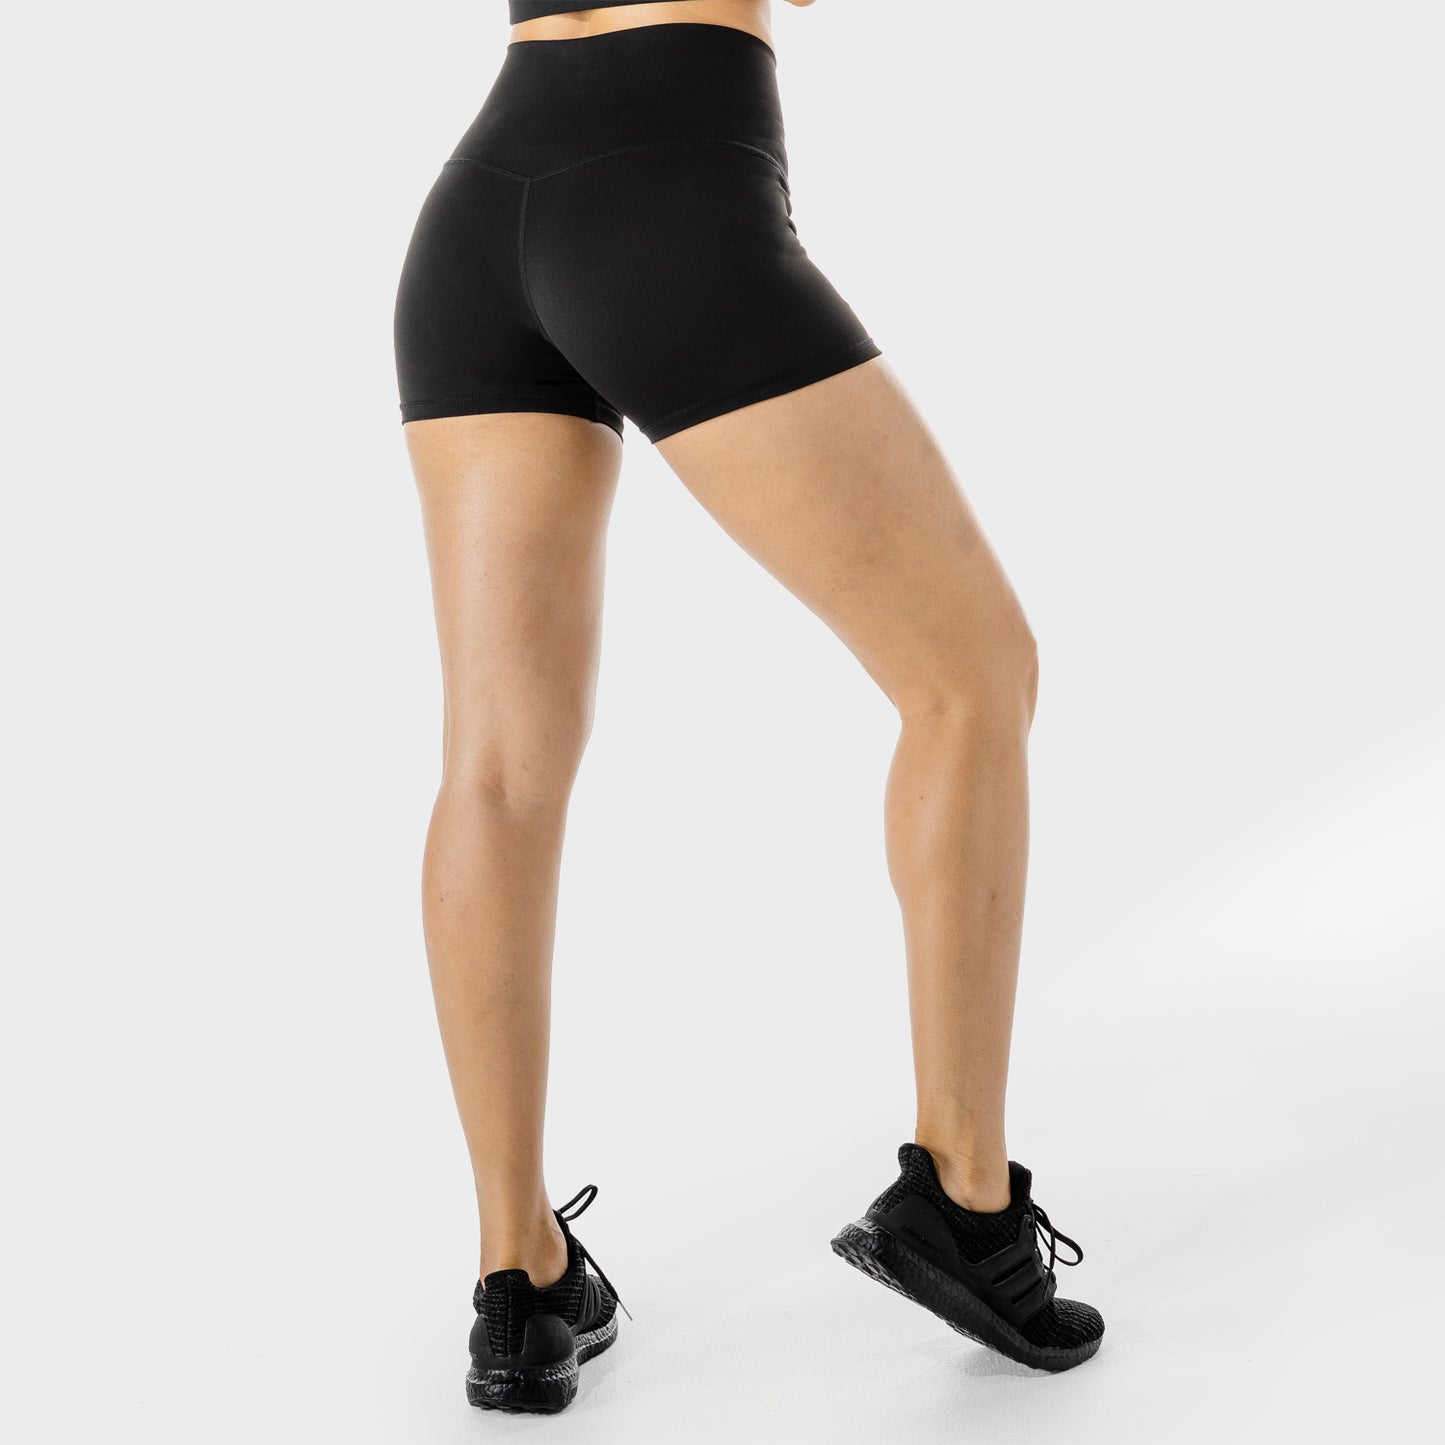 squatwolf-workout-clothes-womens-fitness-tie-shorts-black-gym-shorts